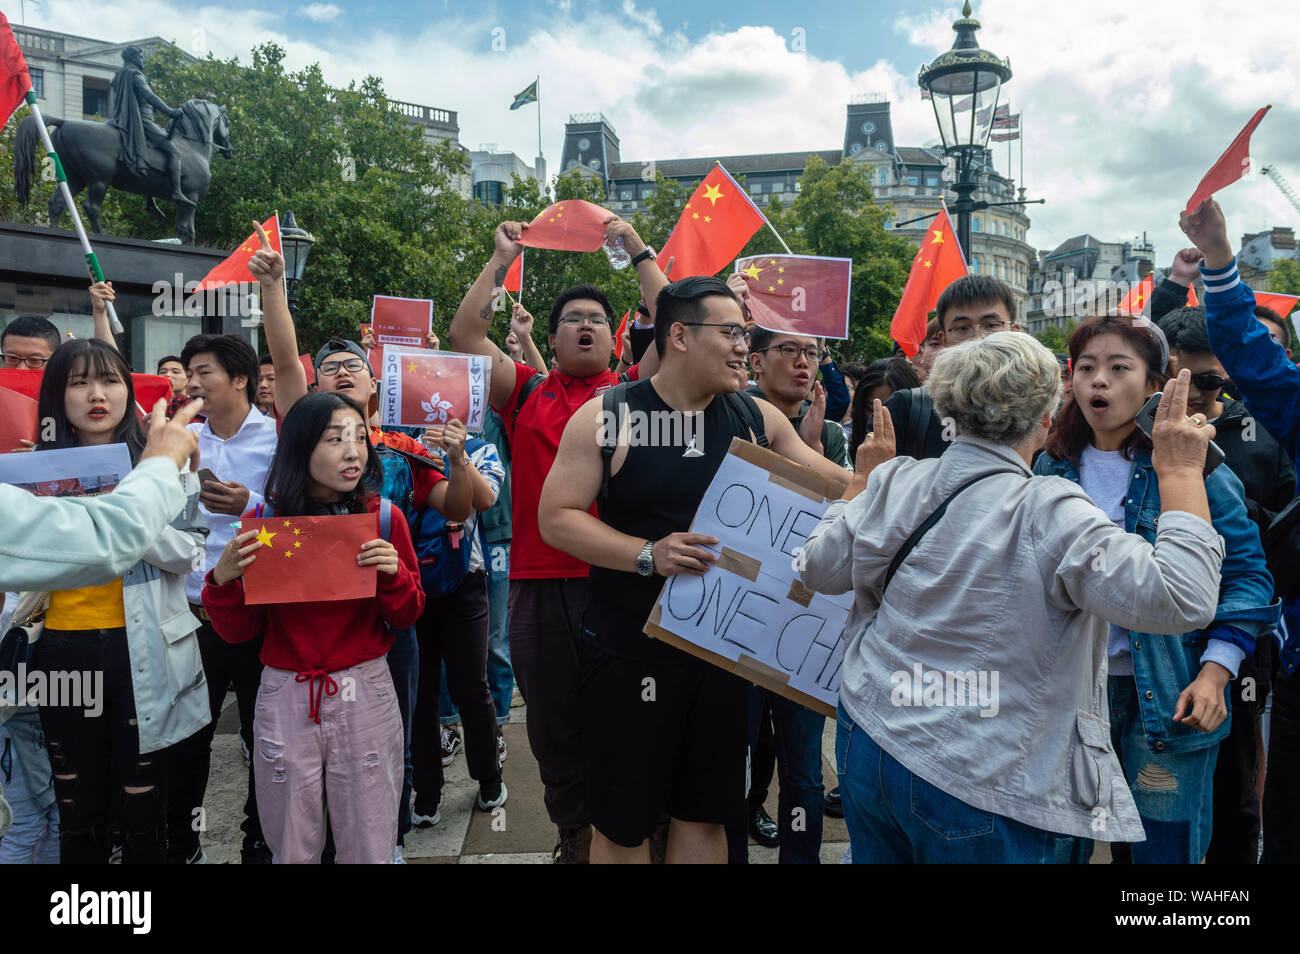 Female British national squaring up against Chinese female national at the UK Solidarity with Hong Kong rally. Stock Photo